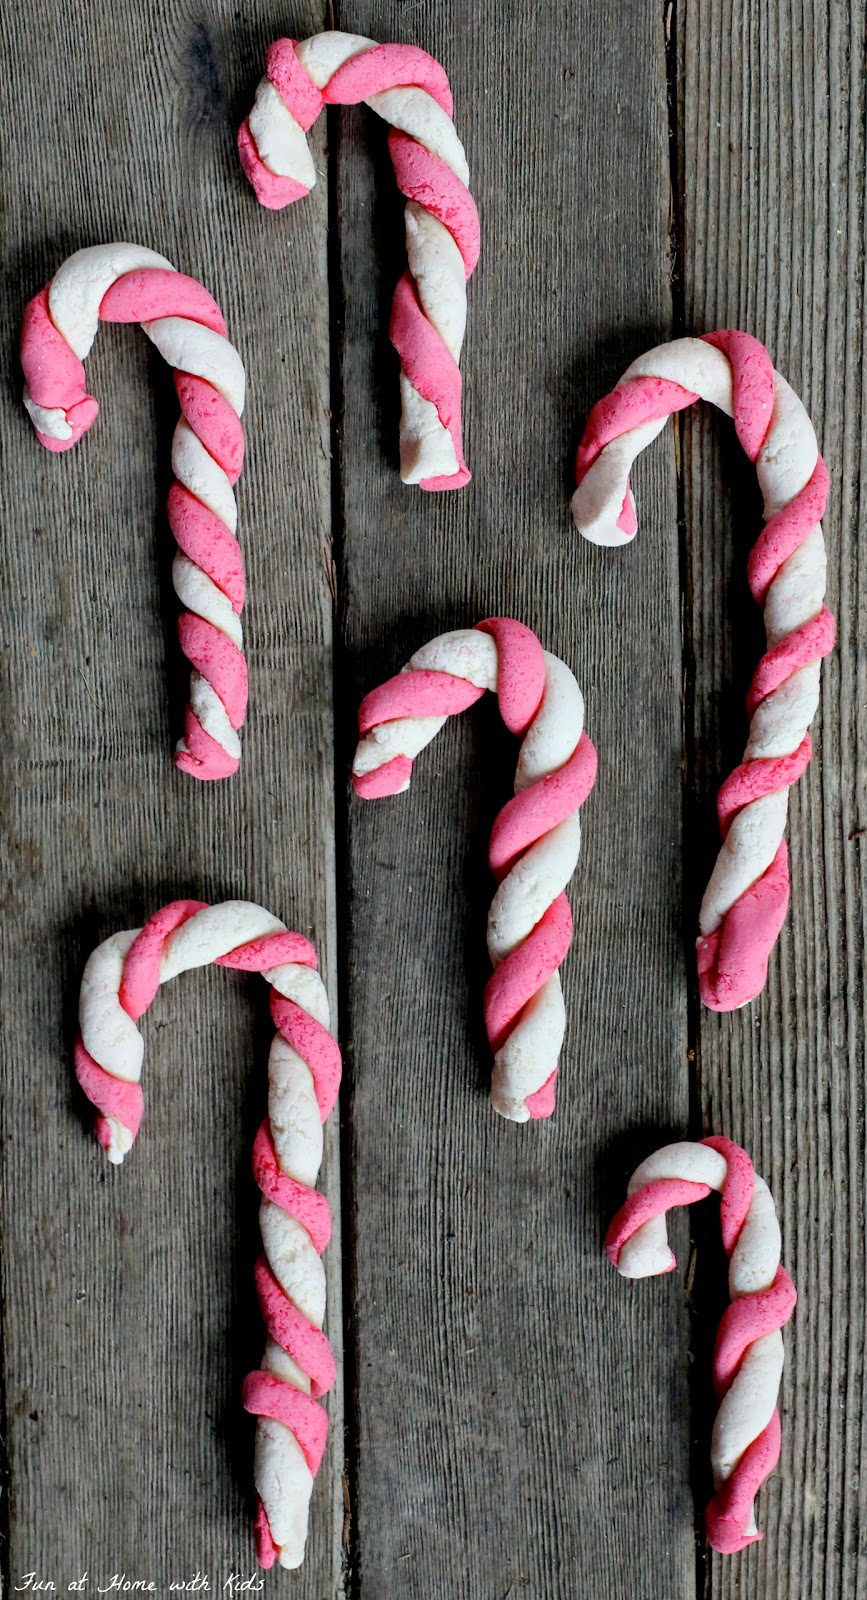 Old Fashioned Candy Cane Ornaments - a great first ornament for toddlers to help make!  From Fun at Home with Kids